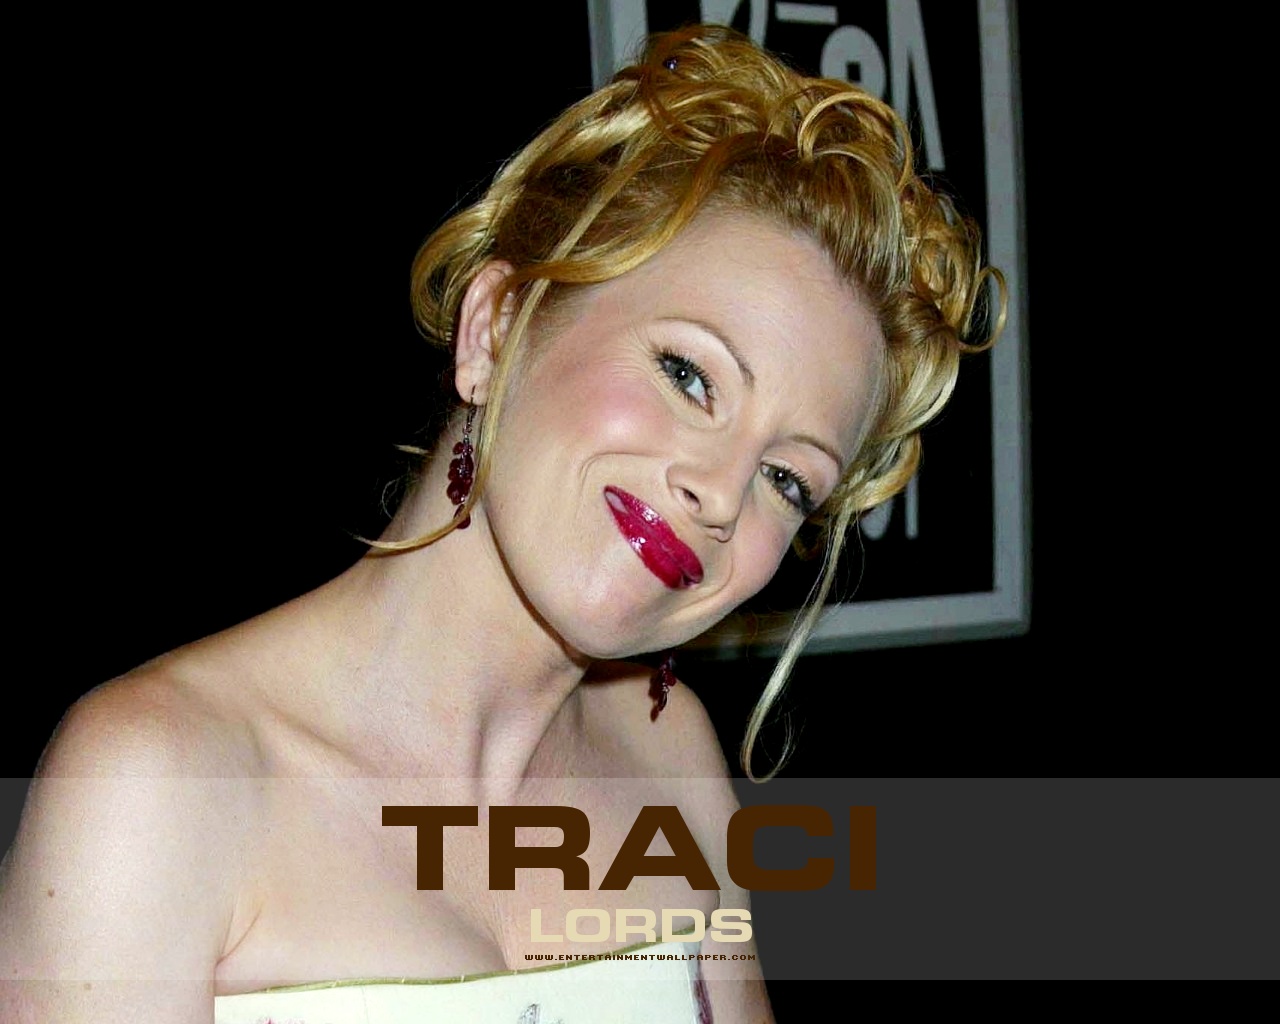 Pictures of Traci Lords, Picture #229025 - Pictures Of Celebrities